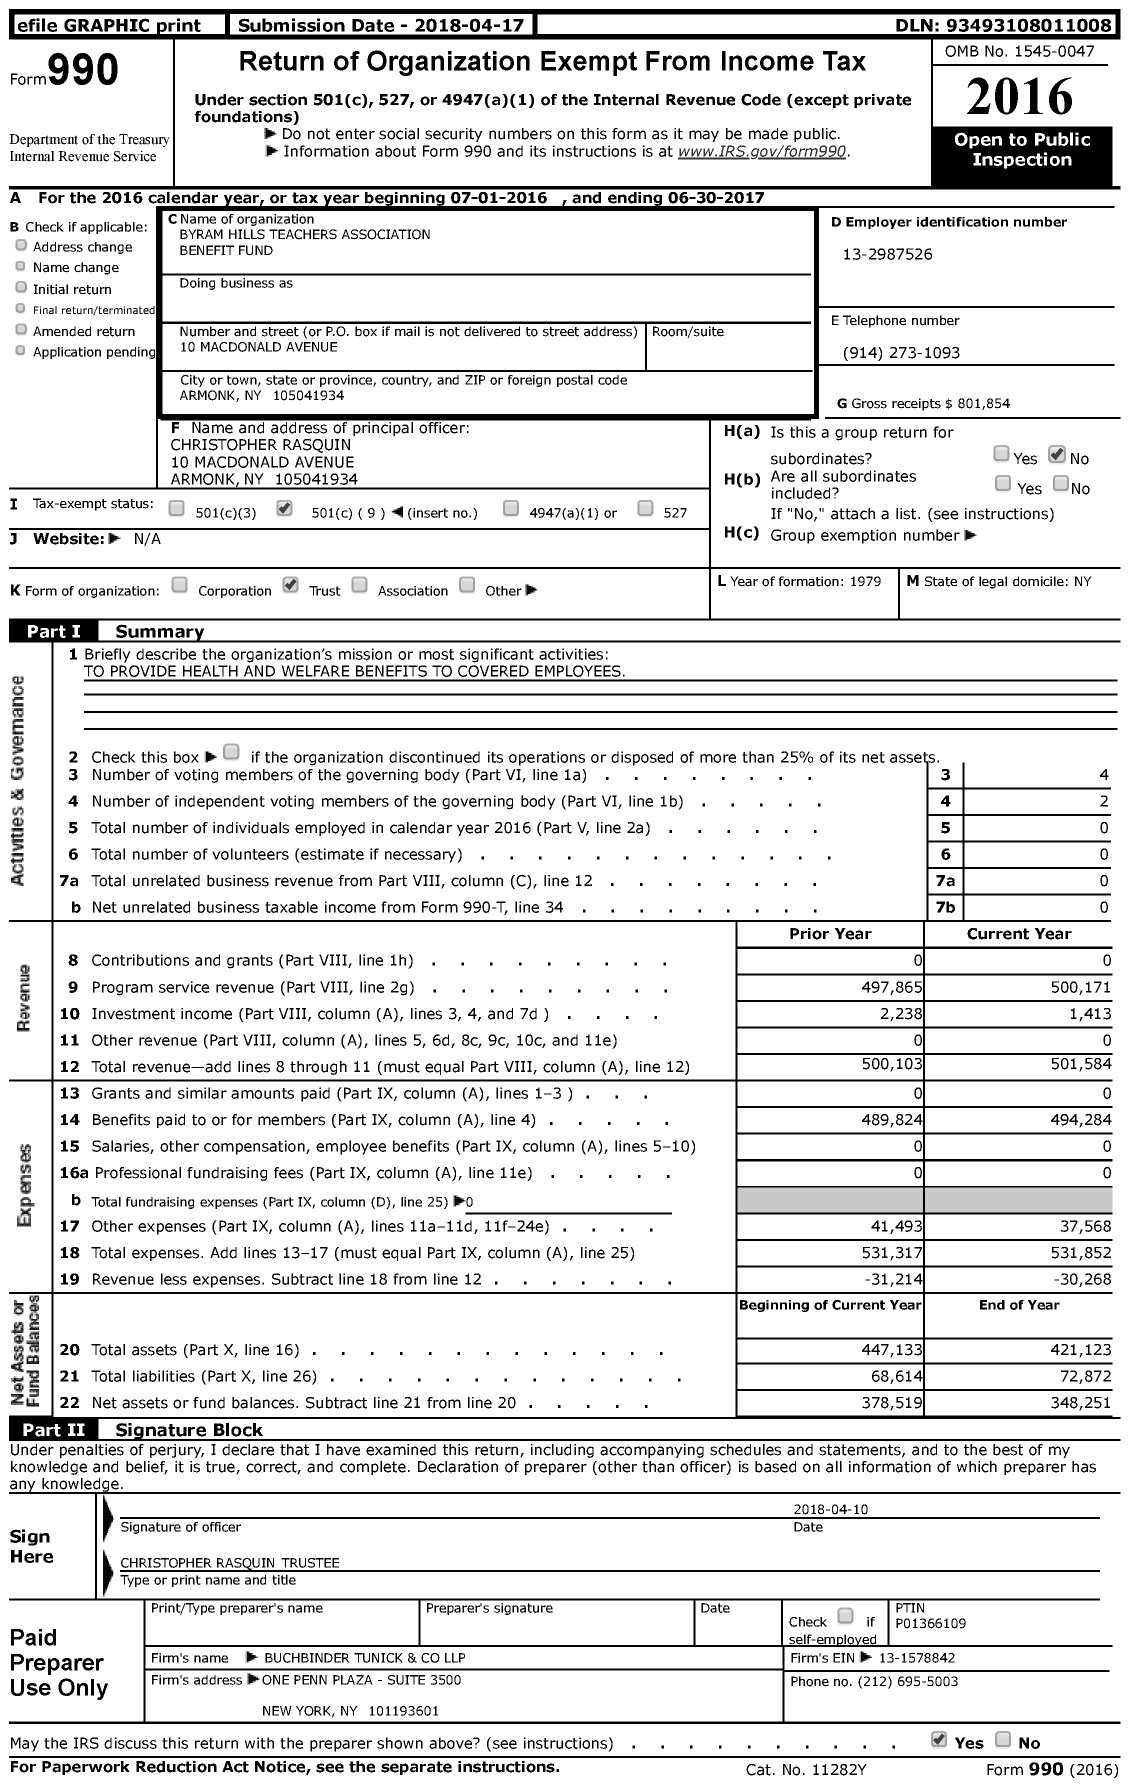 Image of first page of 2016 Form 990 for Byram Hills Teachers Association Benefit Fund